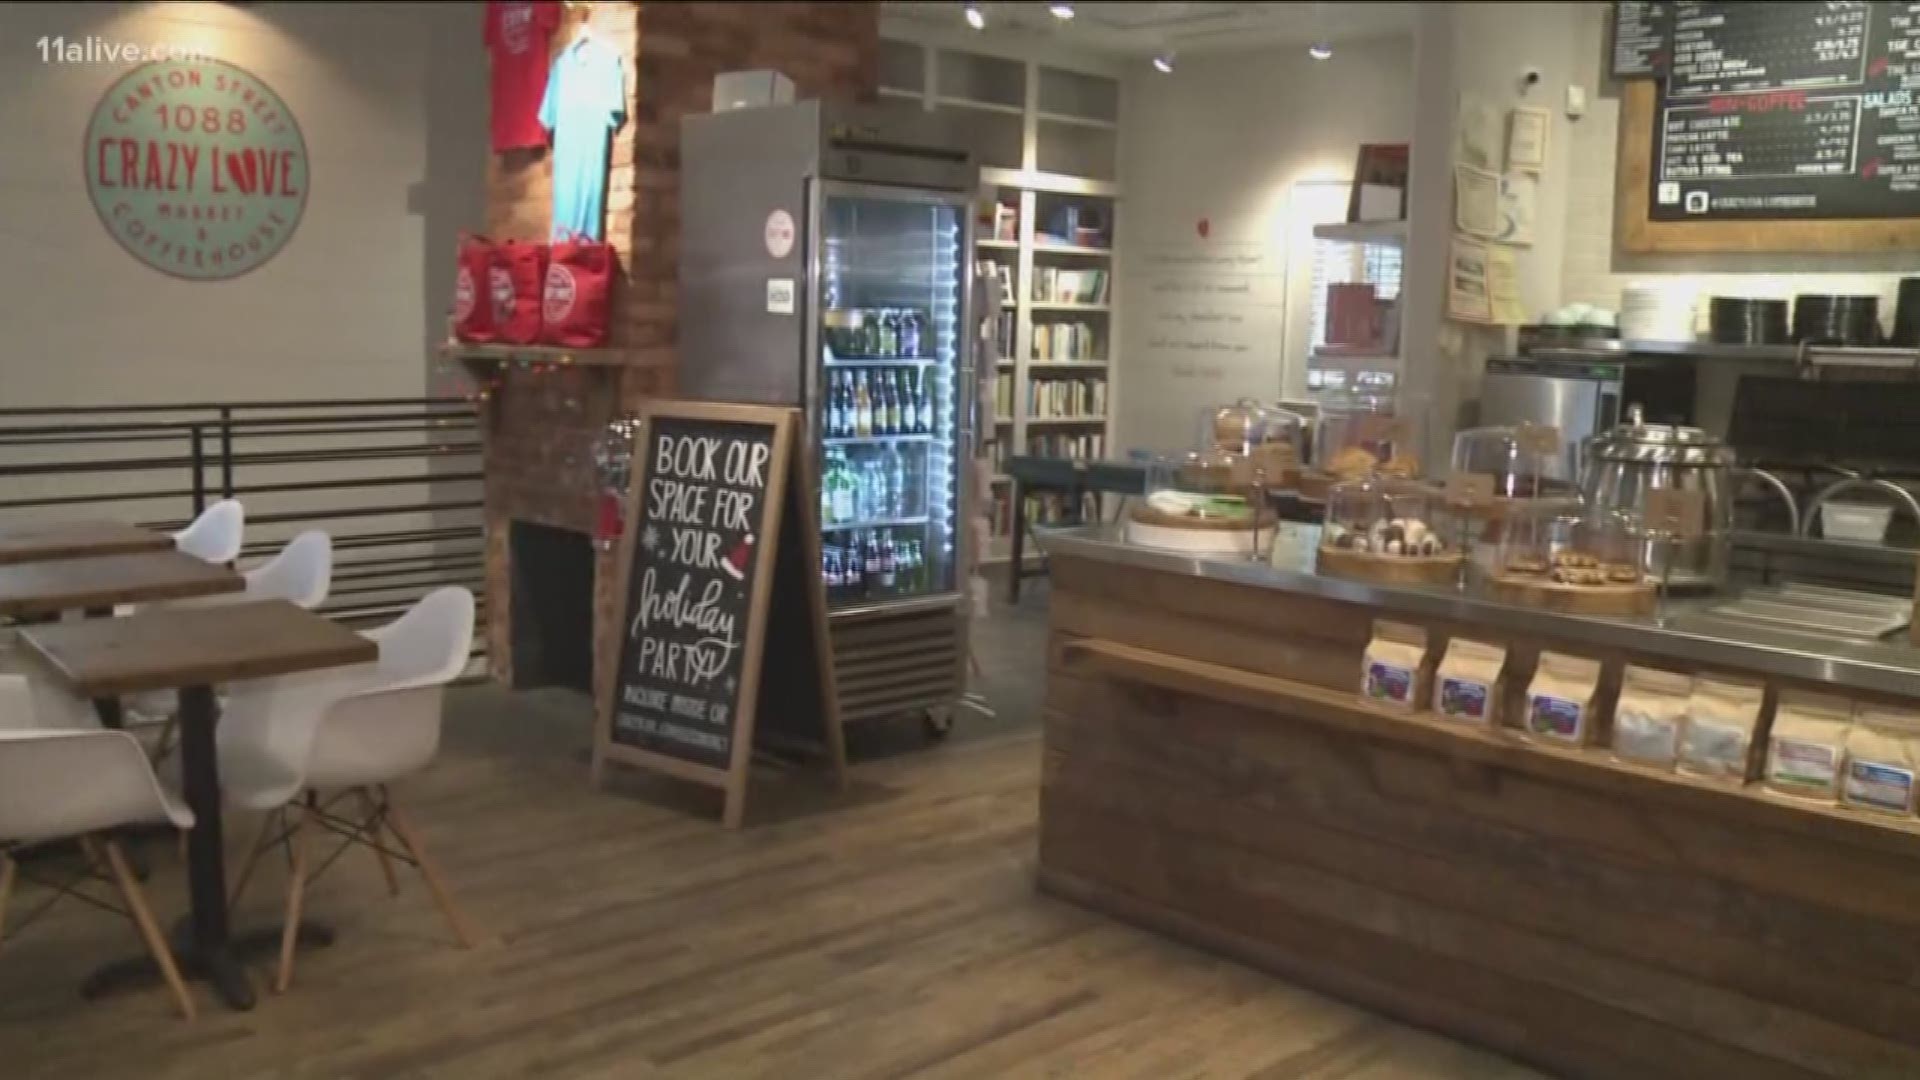 Local businesses hope to cash in on the increased sales during the holiday shopping period.